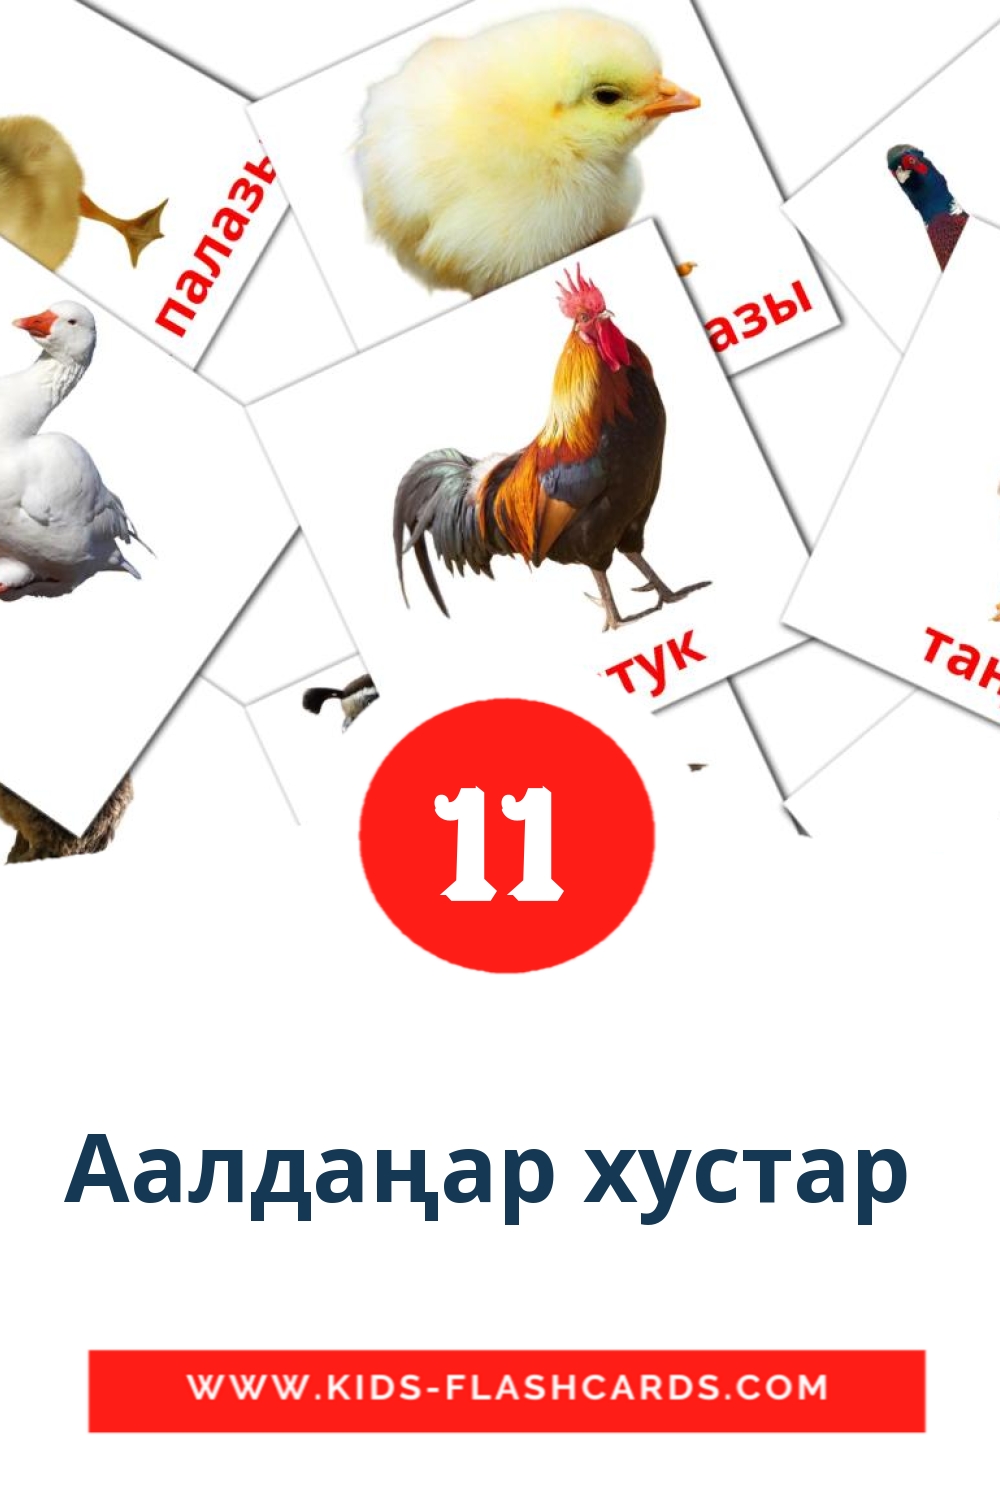 11 Аалдаңар хустар  Picture Cards for Kindergarden in kyrgyz